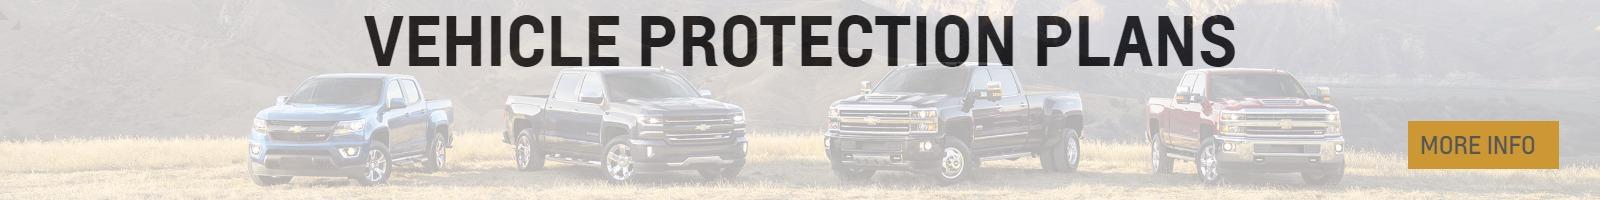 VEHICLE PROTECTION PLANS